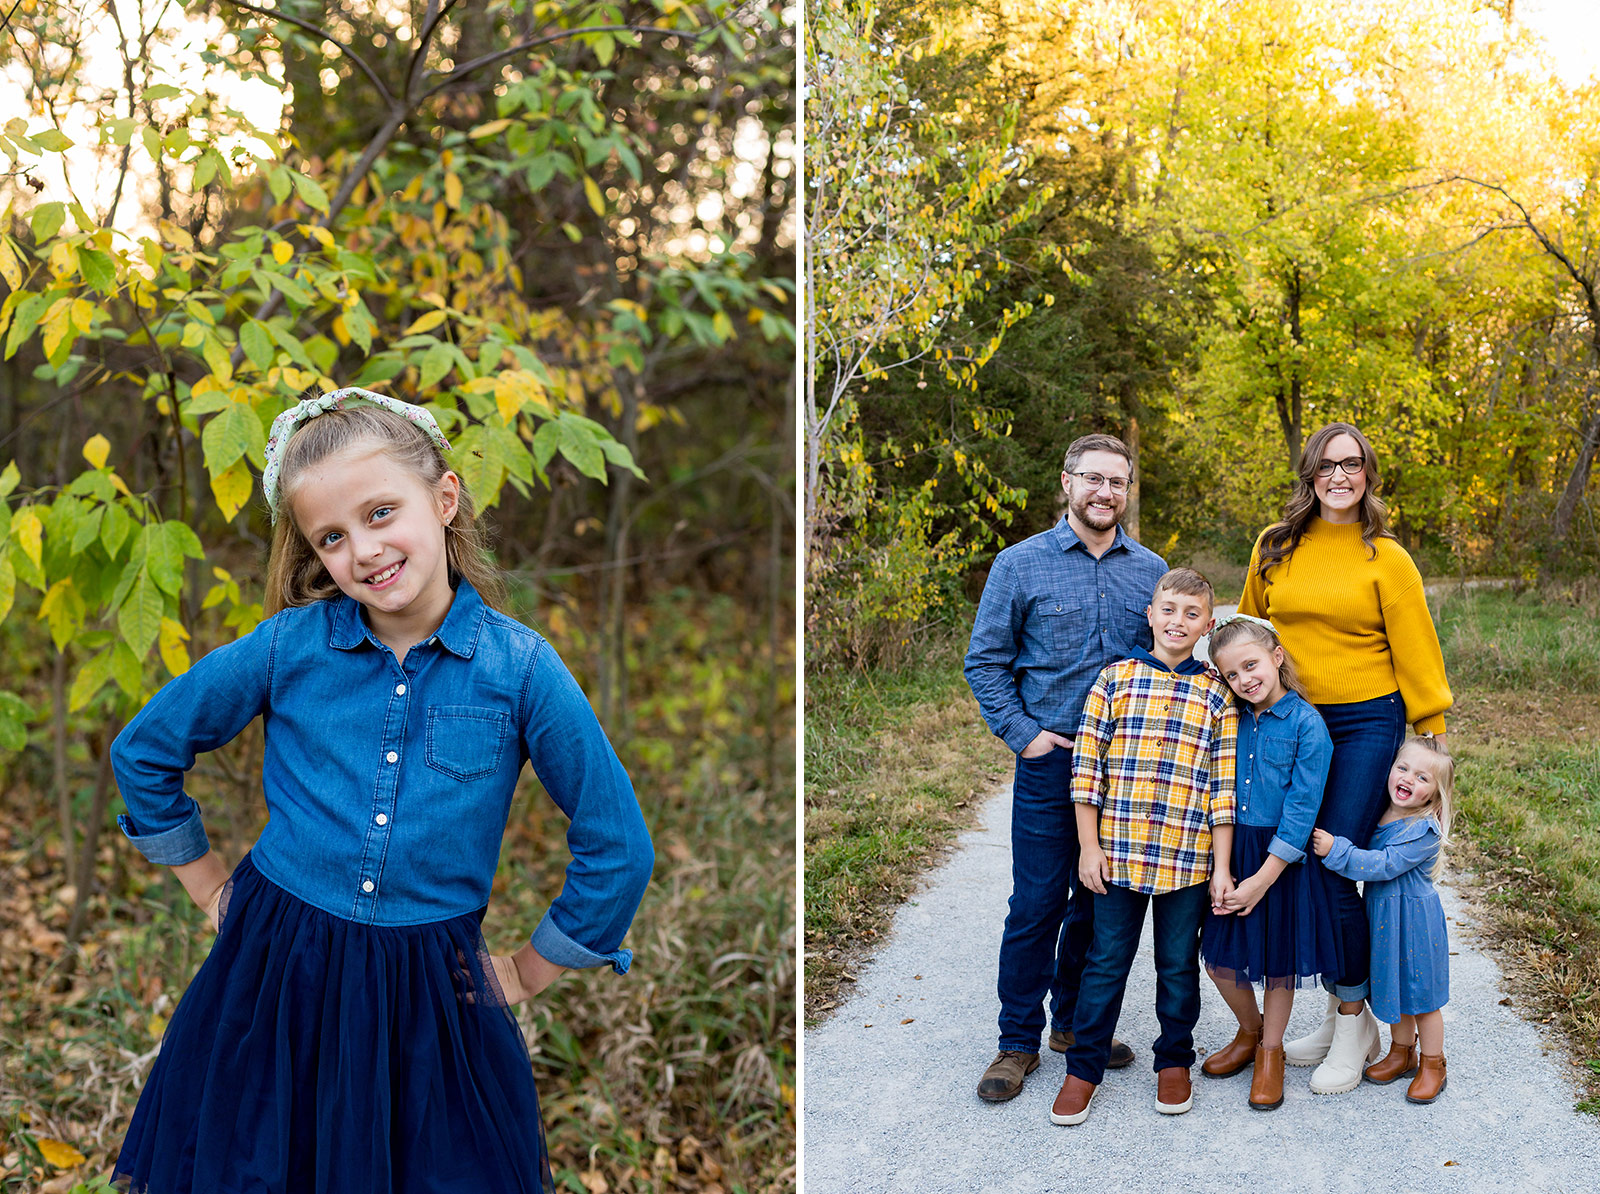 Elise poses for a portrait and the family stands holding hands on a path surrounded by yellow leaves.